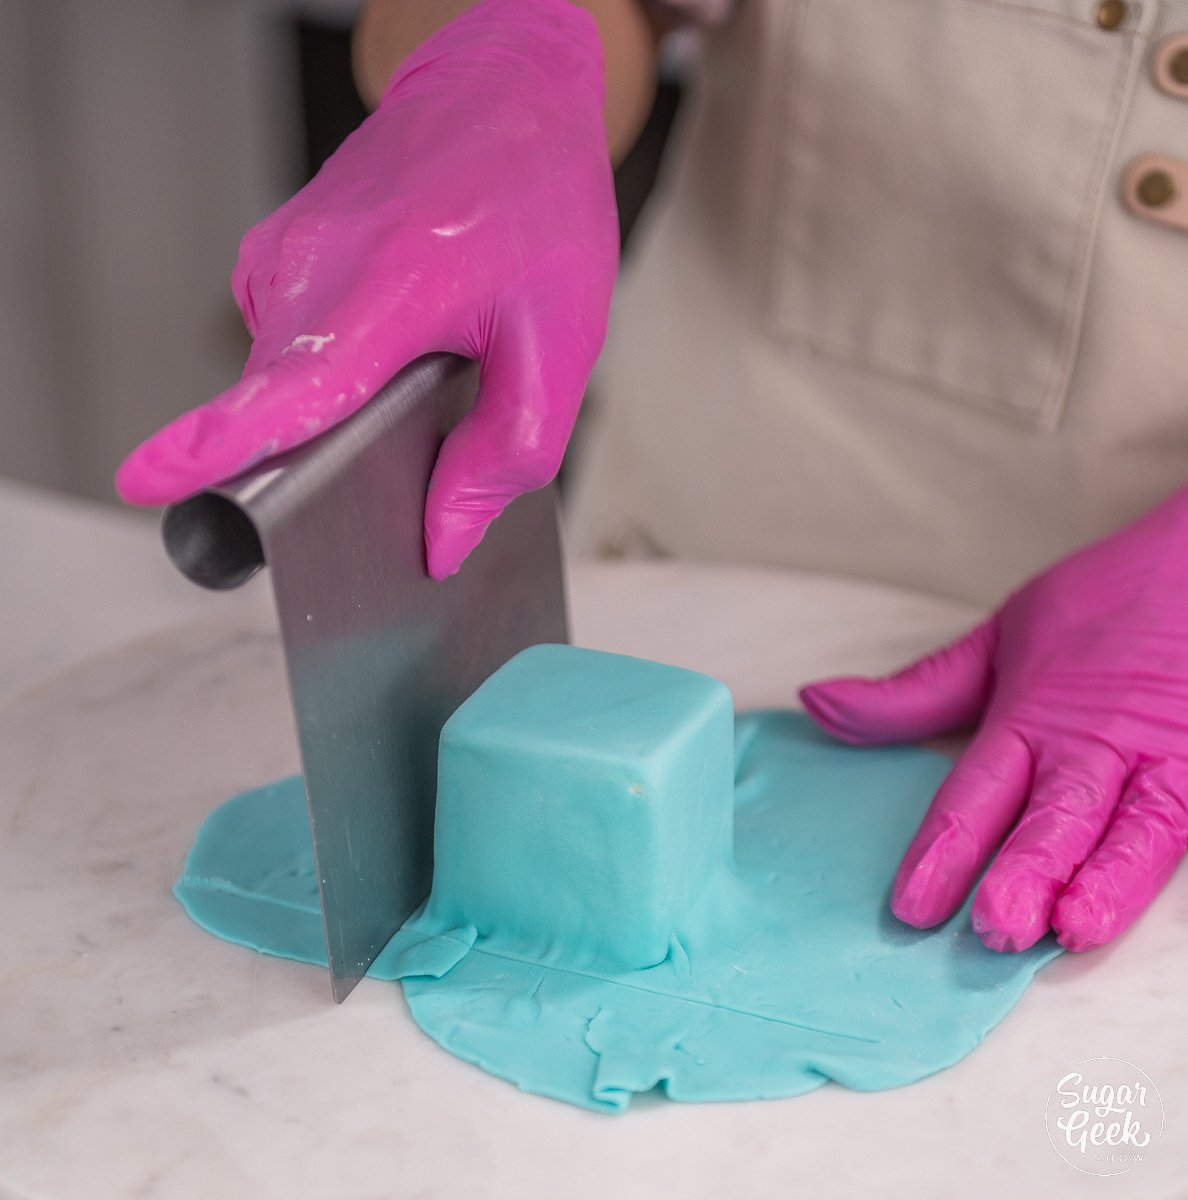 trimming off excess fondant